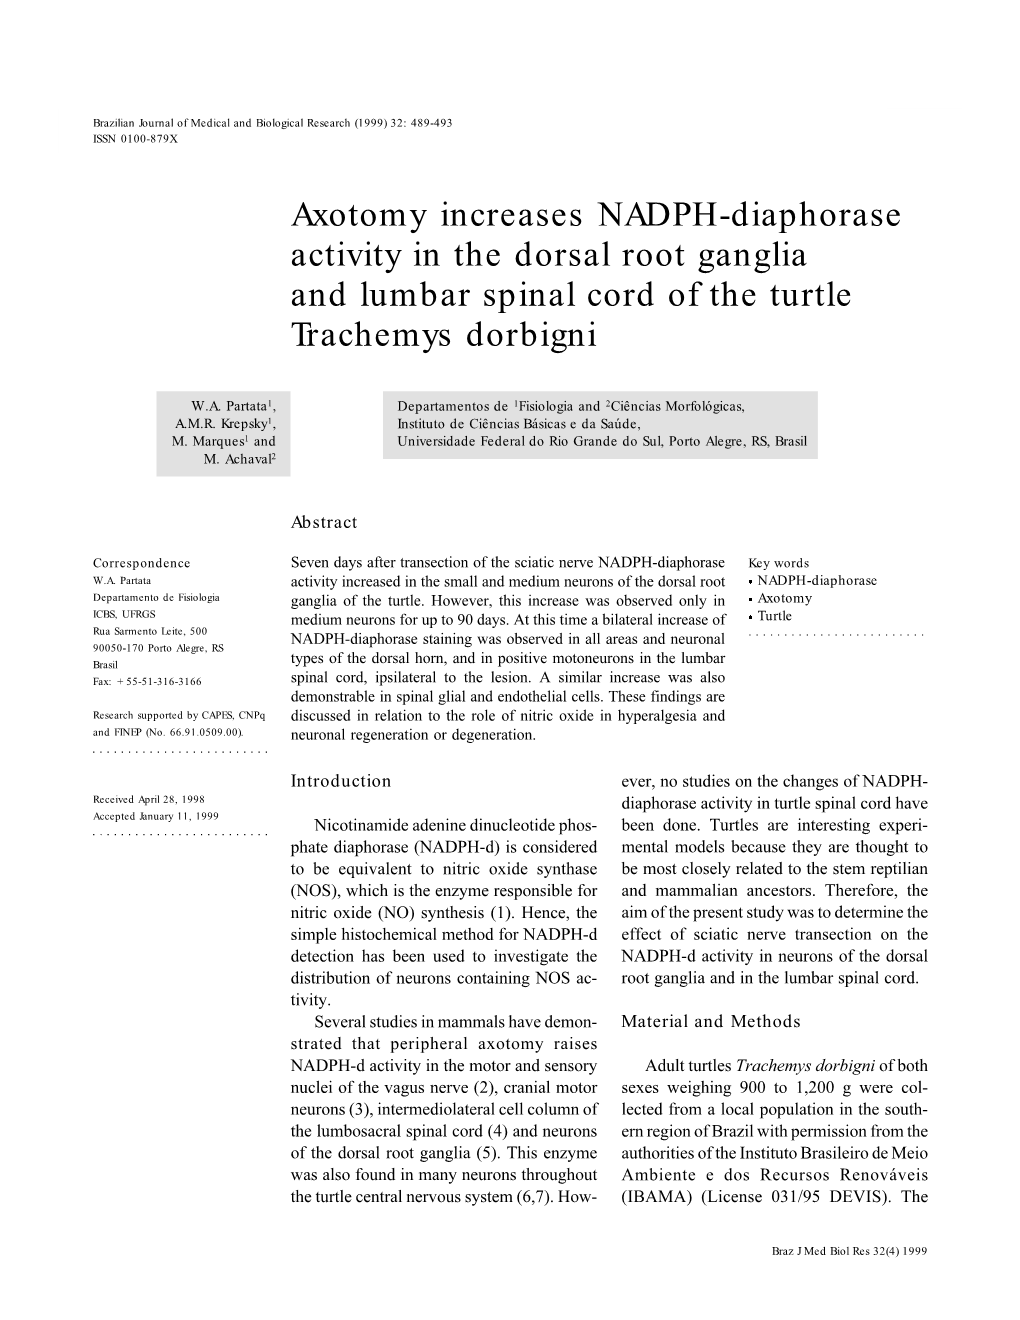 Axotomy Increases NADPH-Diaphorase Activity in the Dorsal Root Ganglia and Lumbar Spinal Cord of the Turtle Trachemys Dorbigni